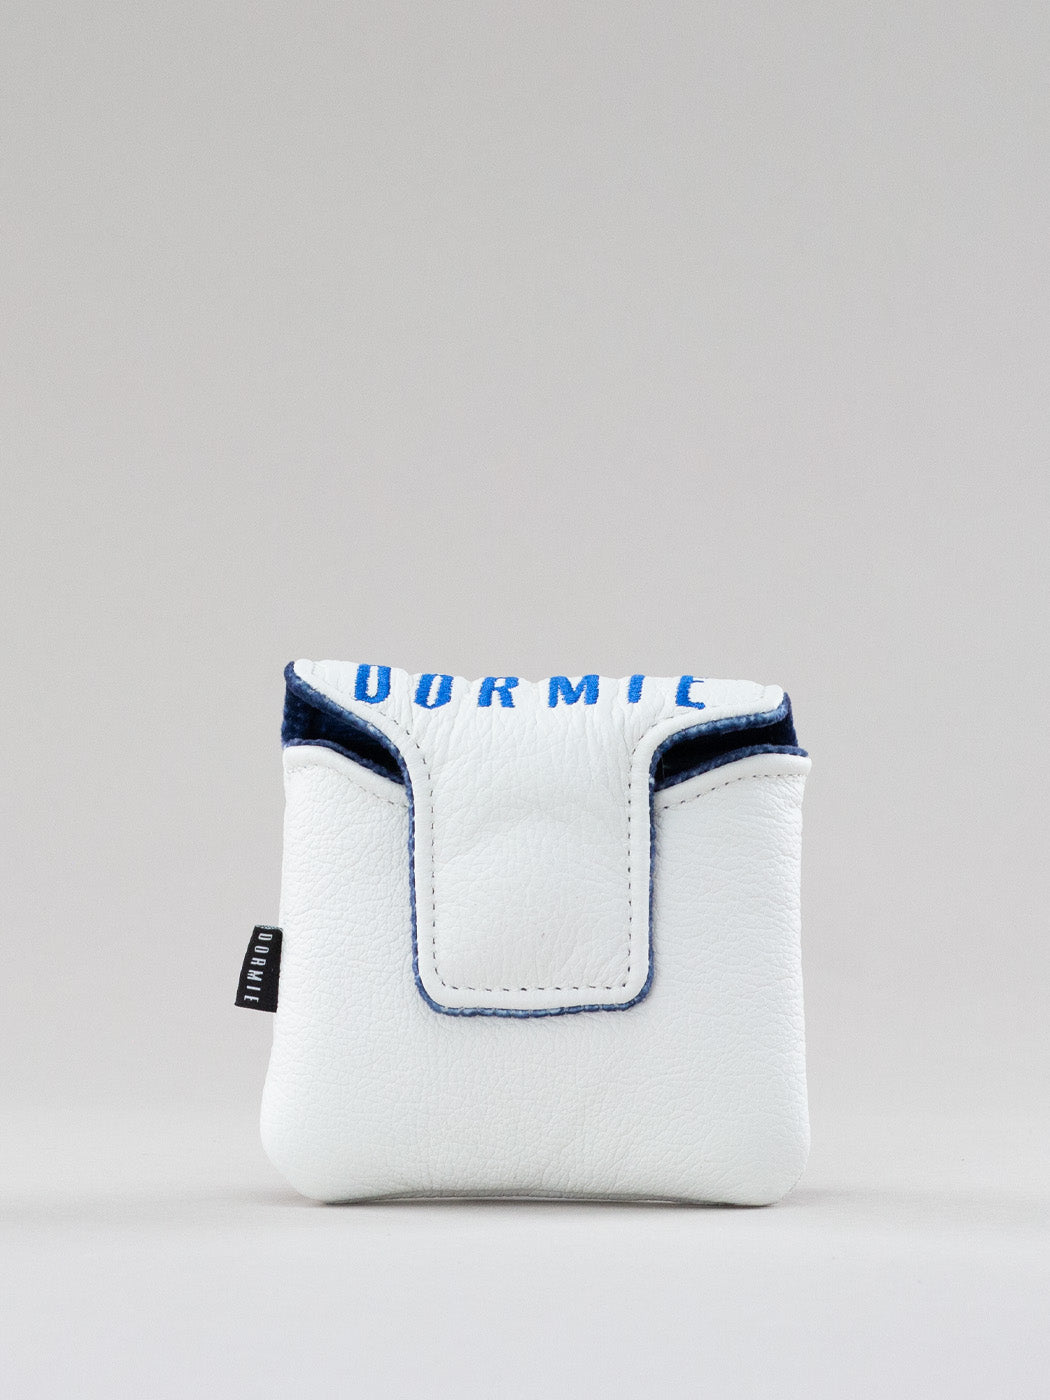 Dormie The Closer Mallet Putter Headcover